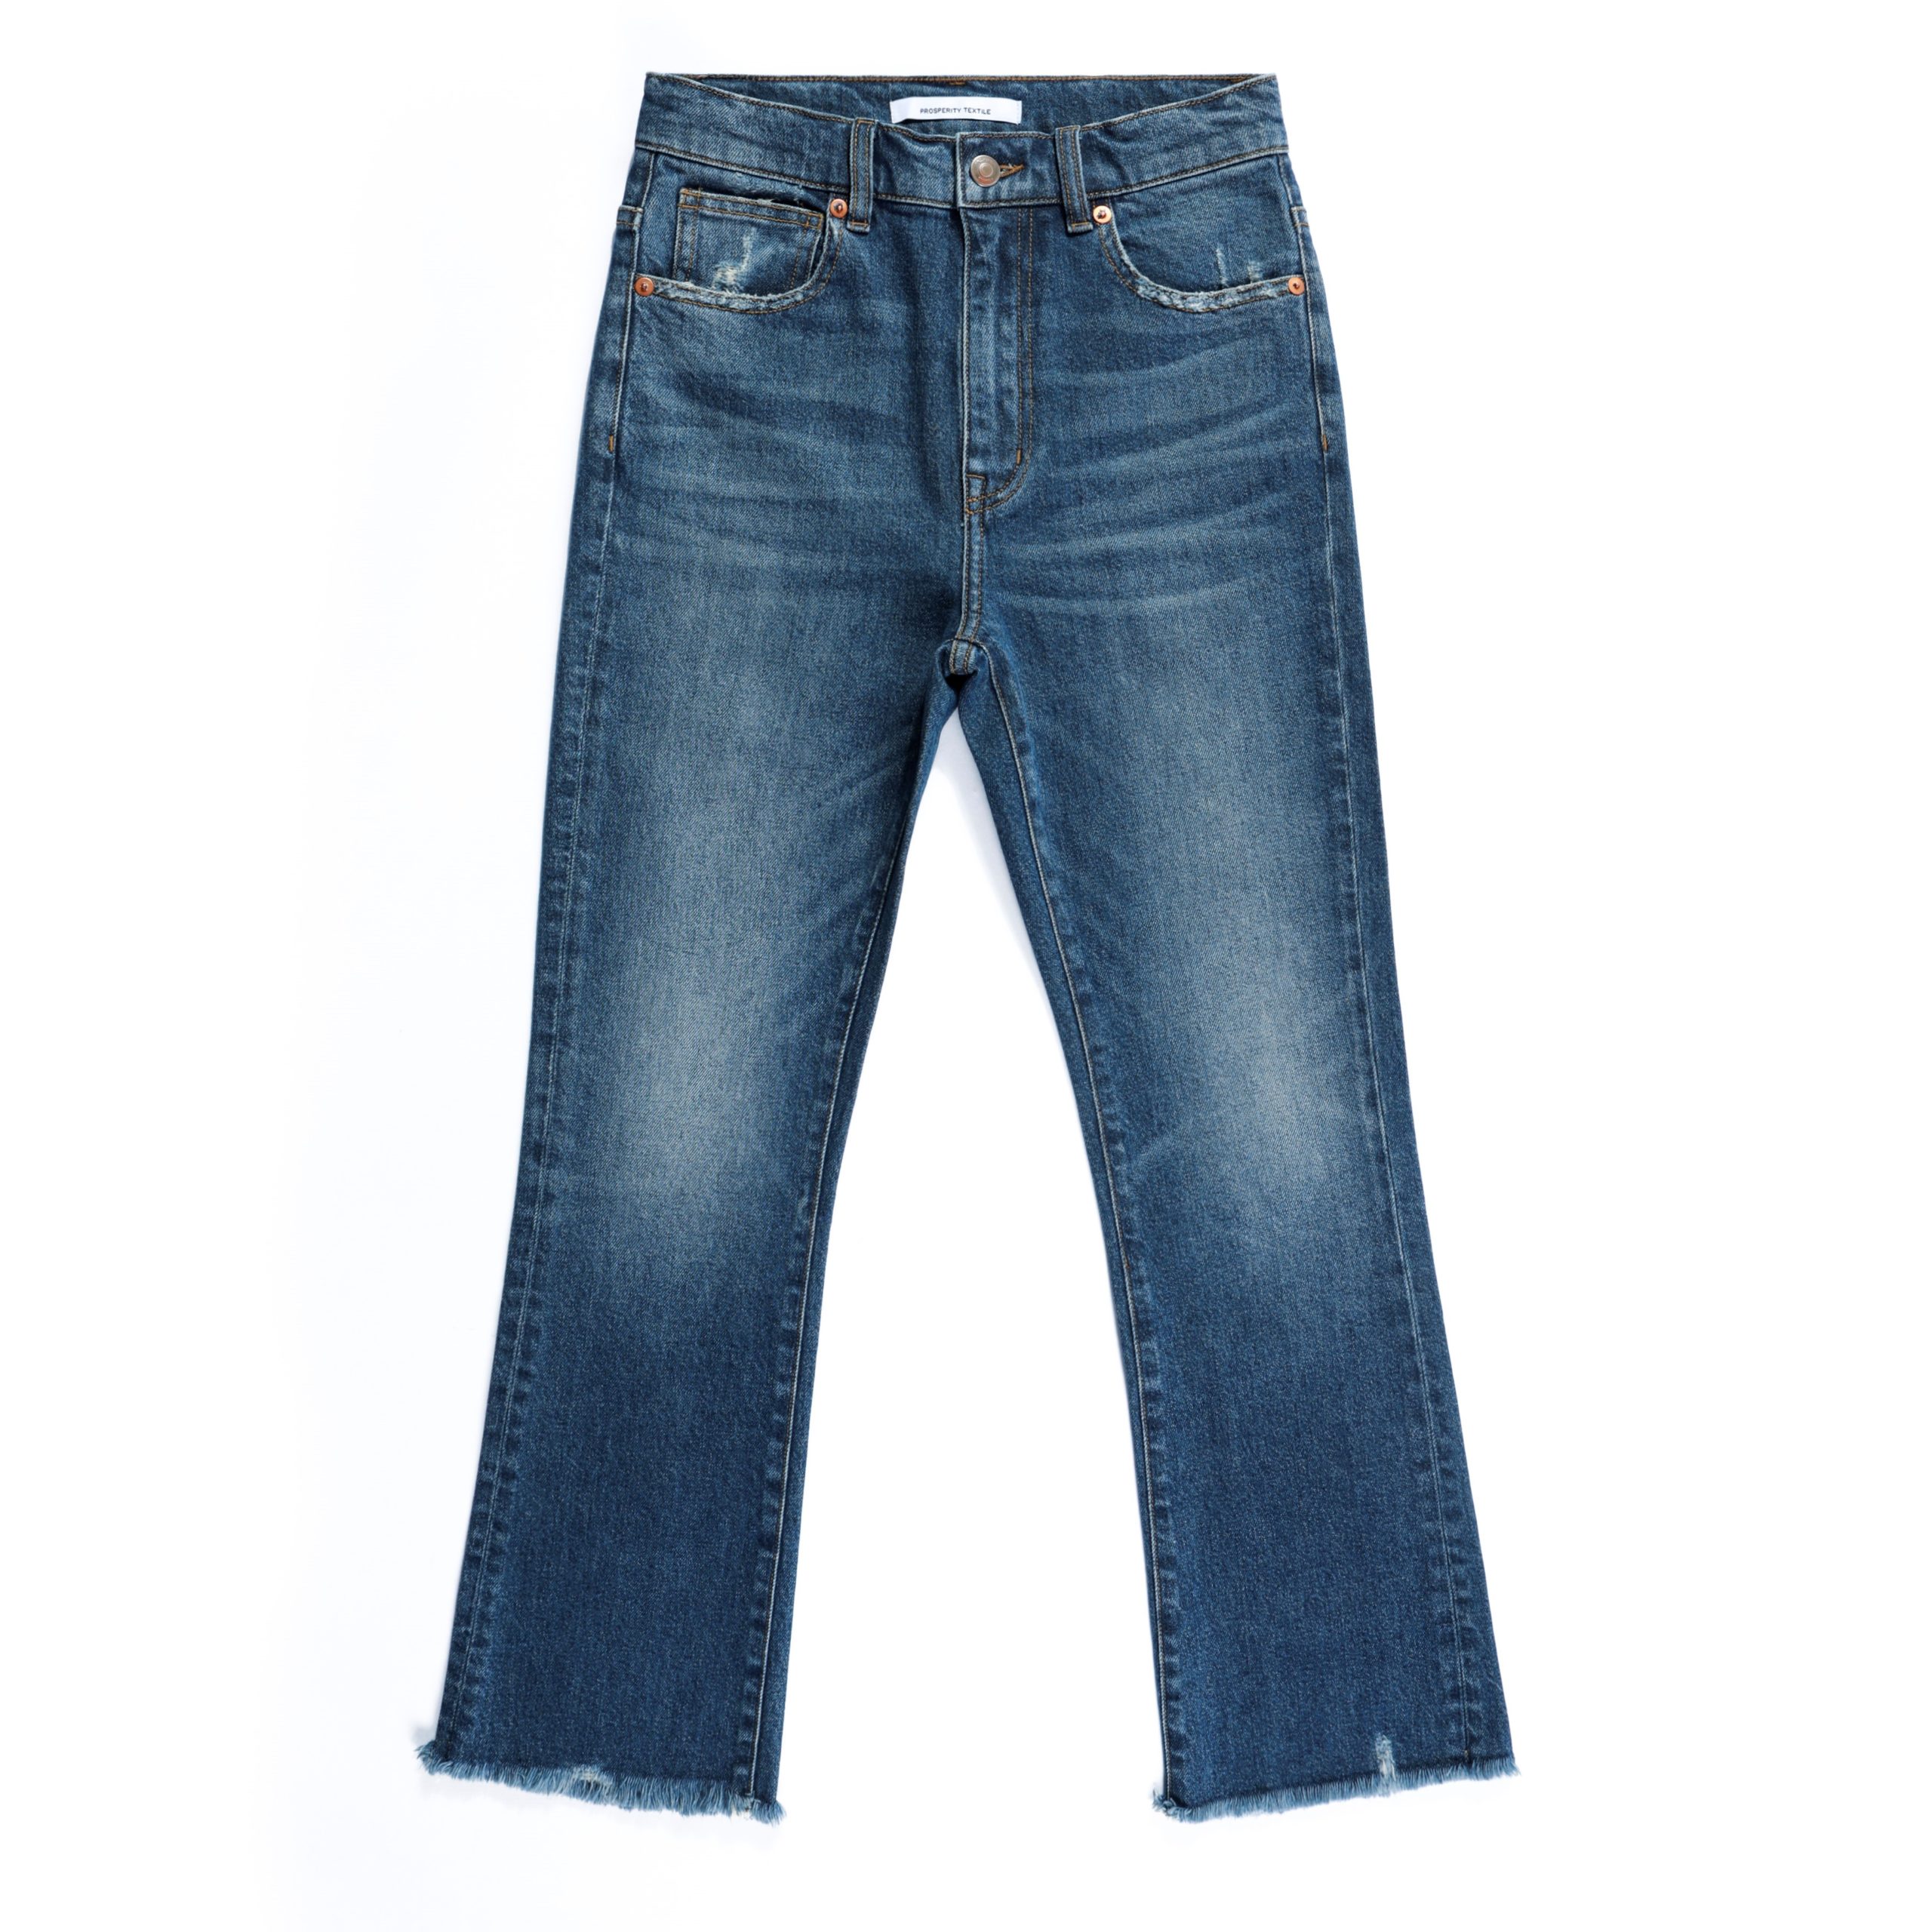 TENCEL™ Denim Trends: The Latest from Mills in Asia - Carved in blue ...